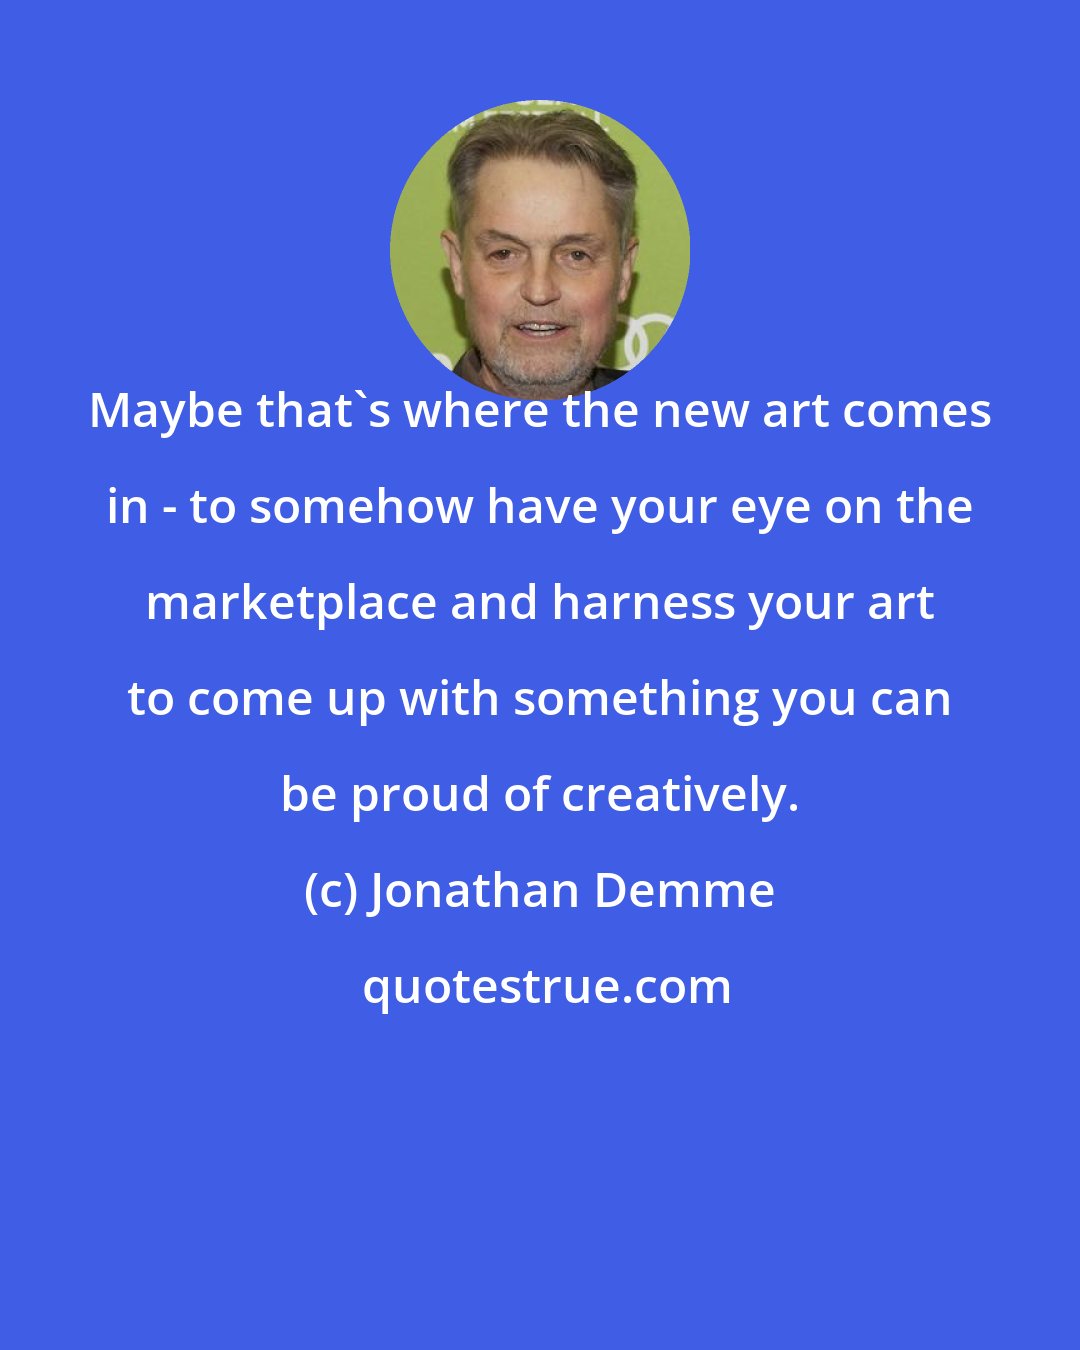 Jonathan Demme: Maybe that's where the new art comes in - to somehow have your eye on the marketplace and harness your art to come up with something you can be proud of creatively.